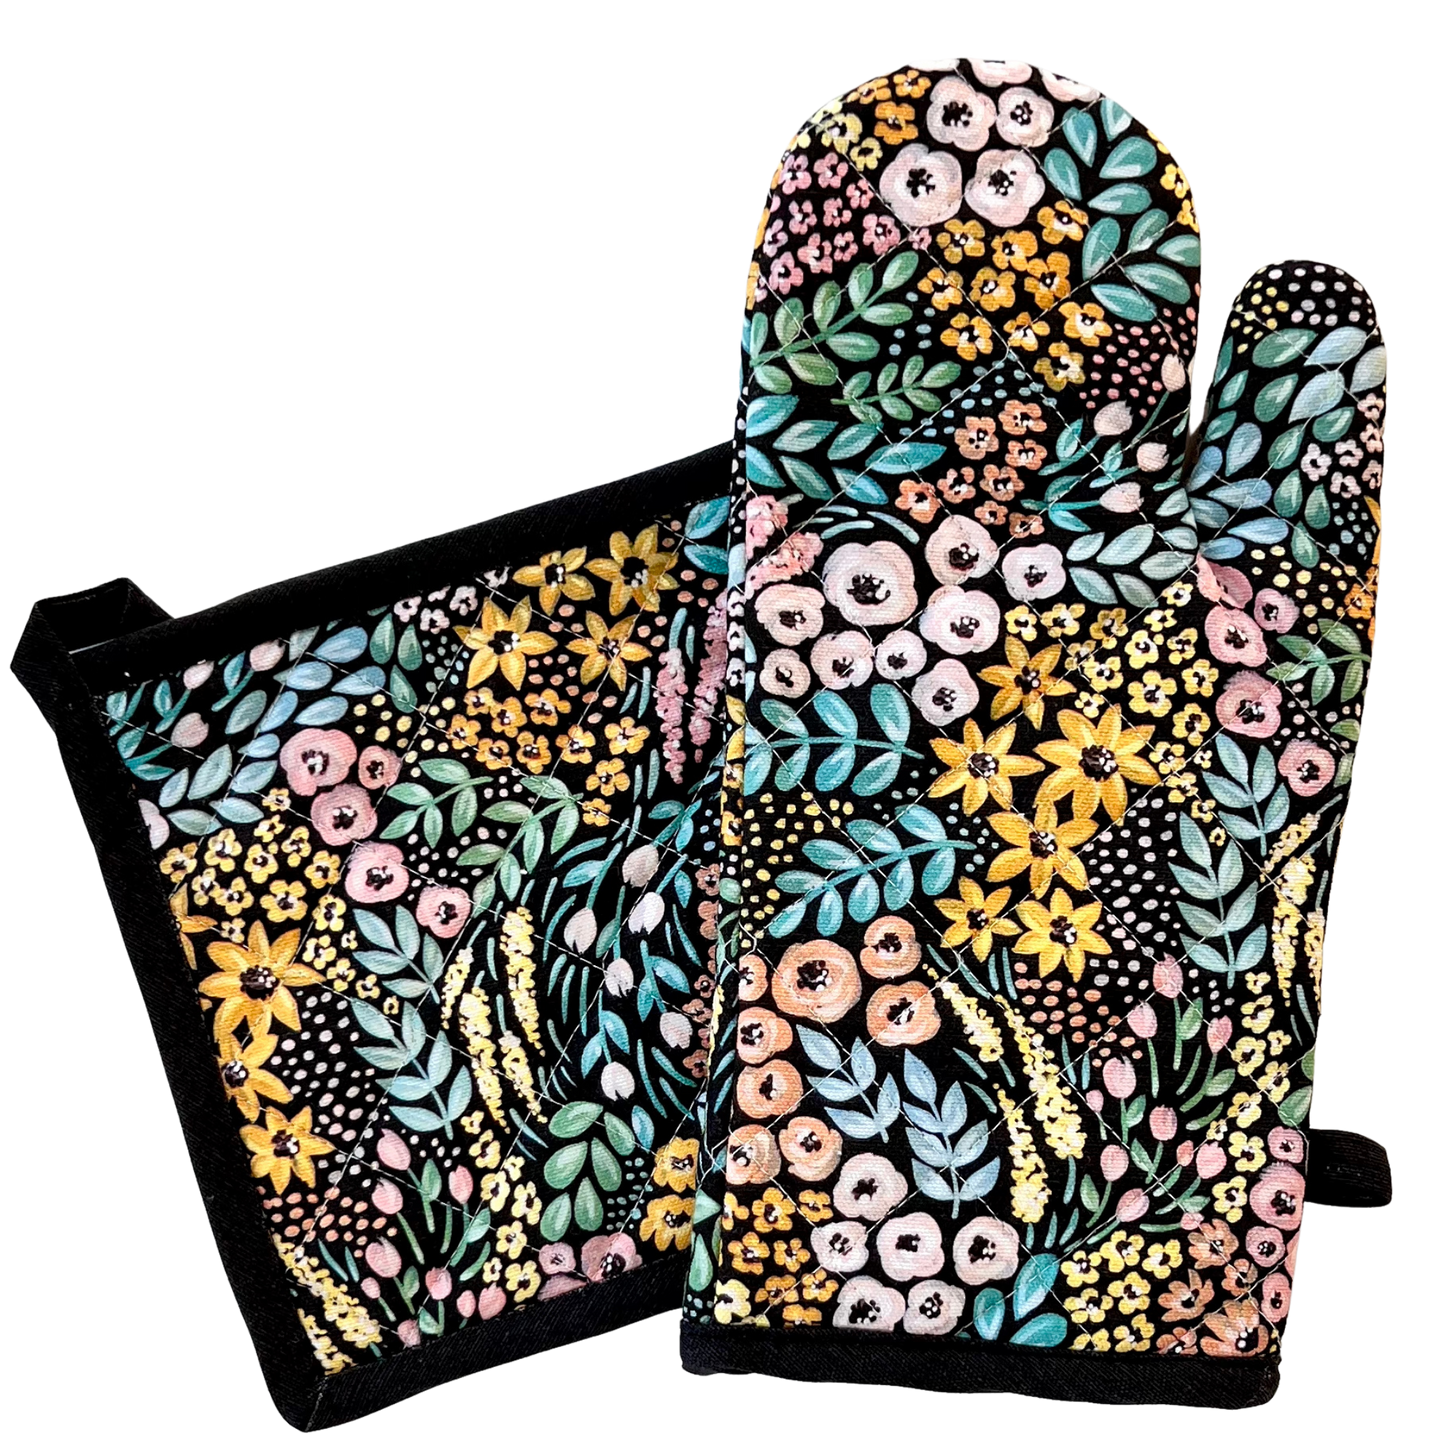 Elyse Breanne Design - Black Floral Oven Mitt + Pot Holder Set  Elyse Breanne Design   -better made easy-eco-friendly-sustainable-gifting